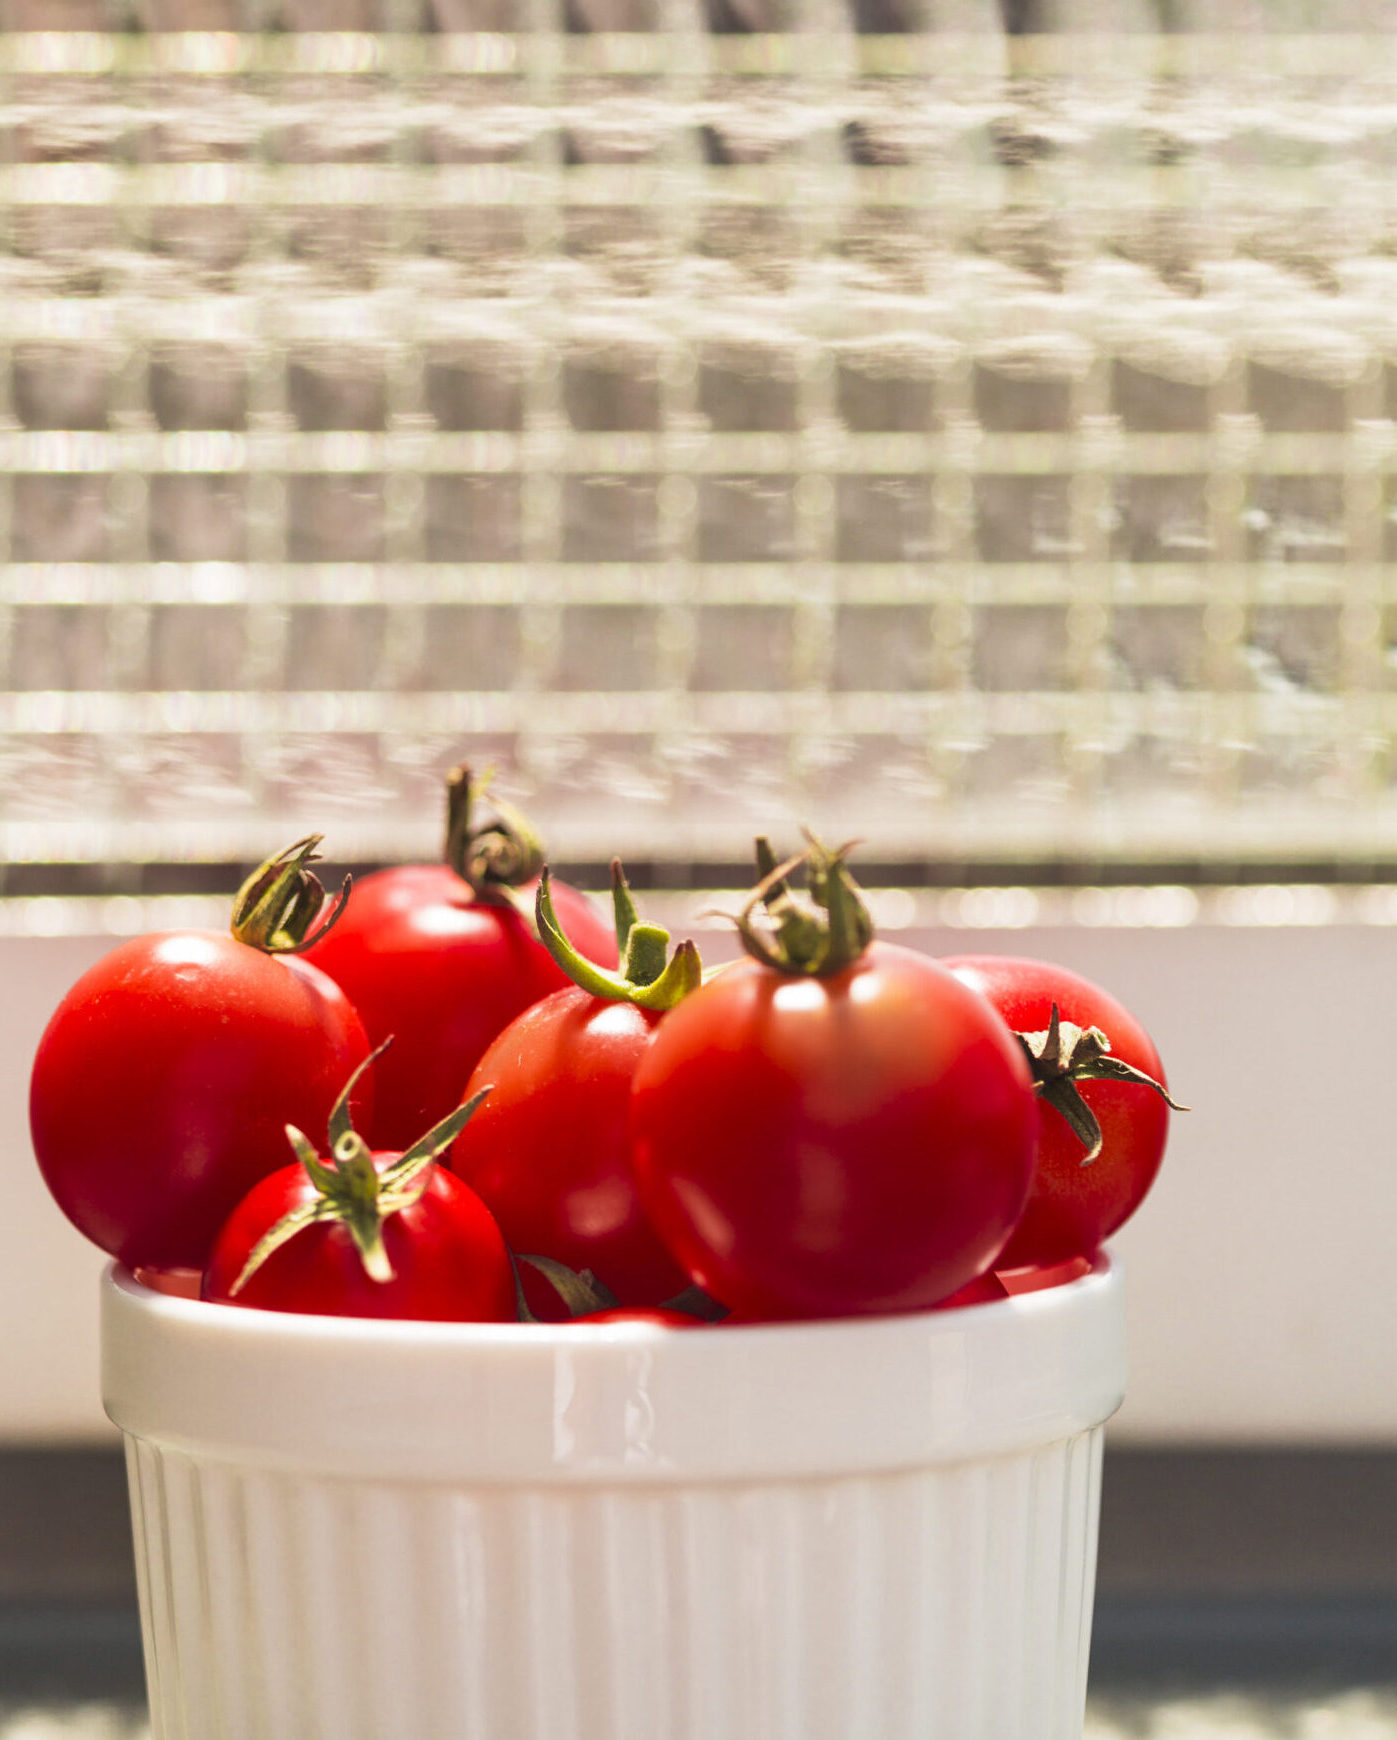 preserving tomatoes | https://fruitsauction.com/